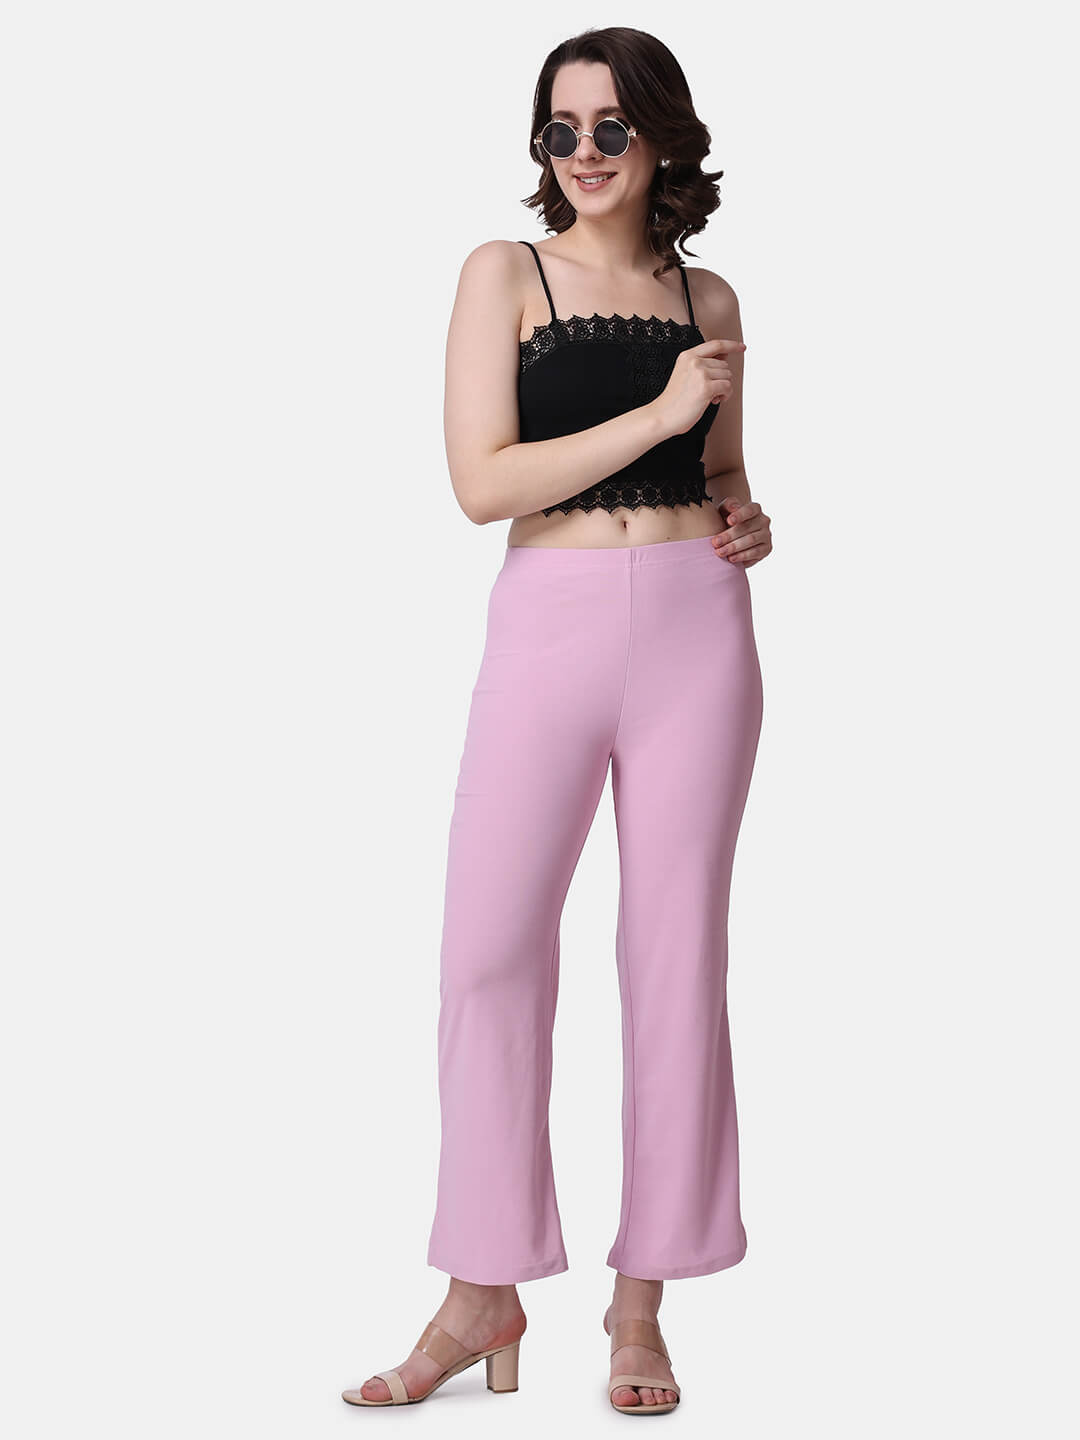 Popwings Formal Casual Pink Solid Highrise Women Trouser